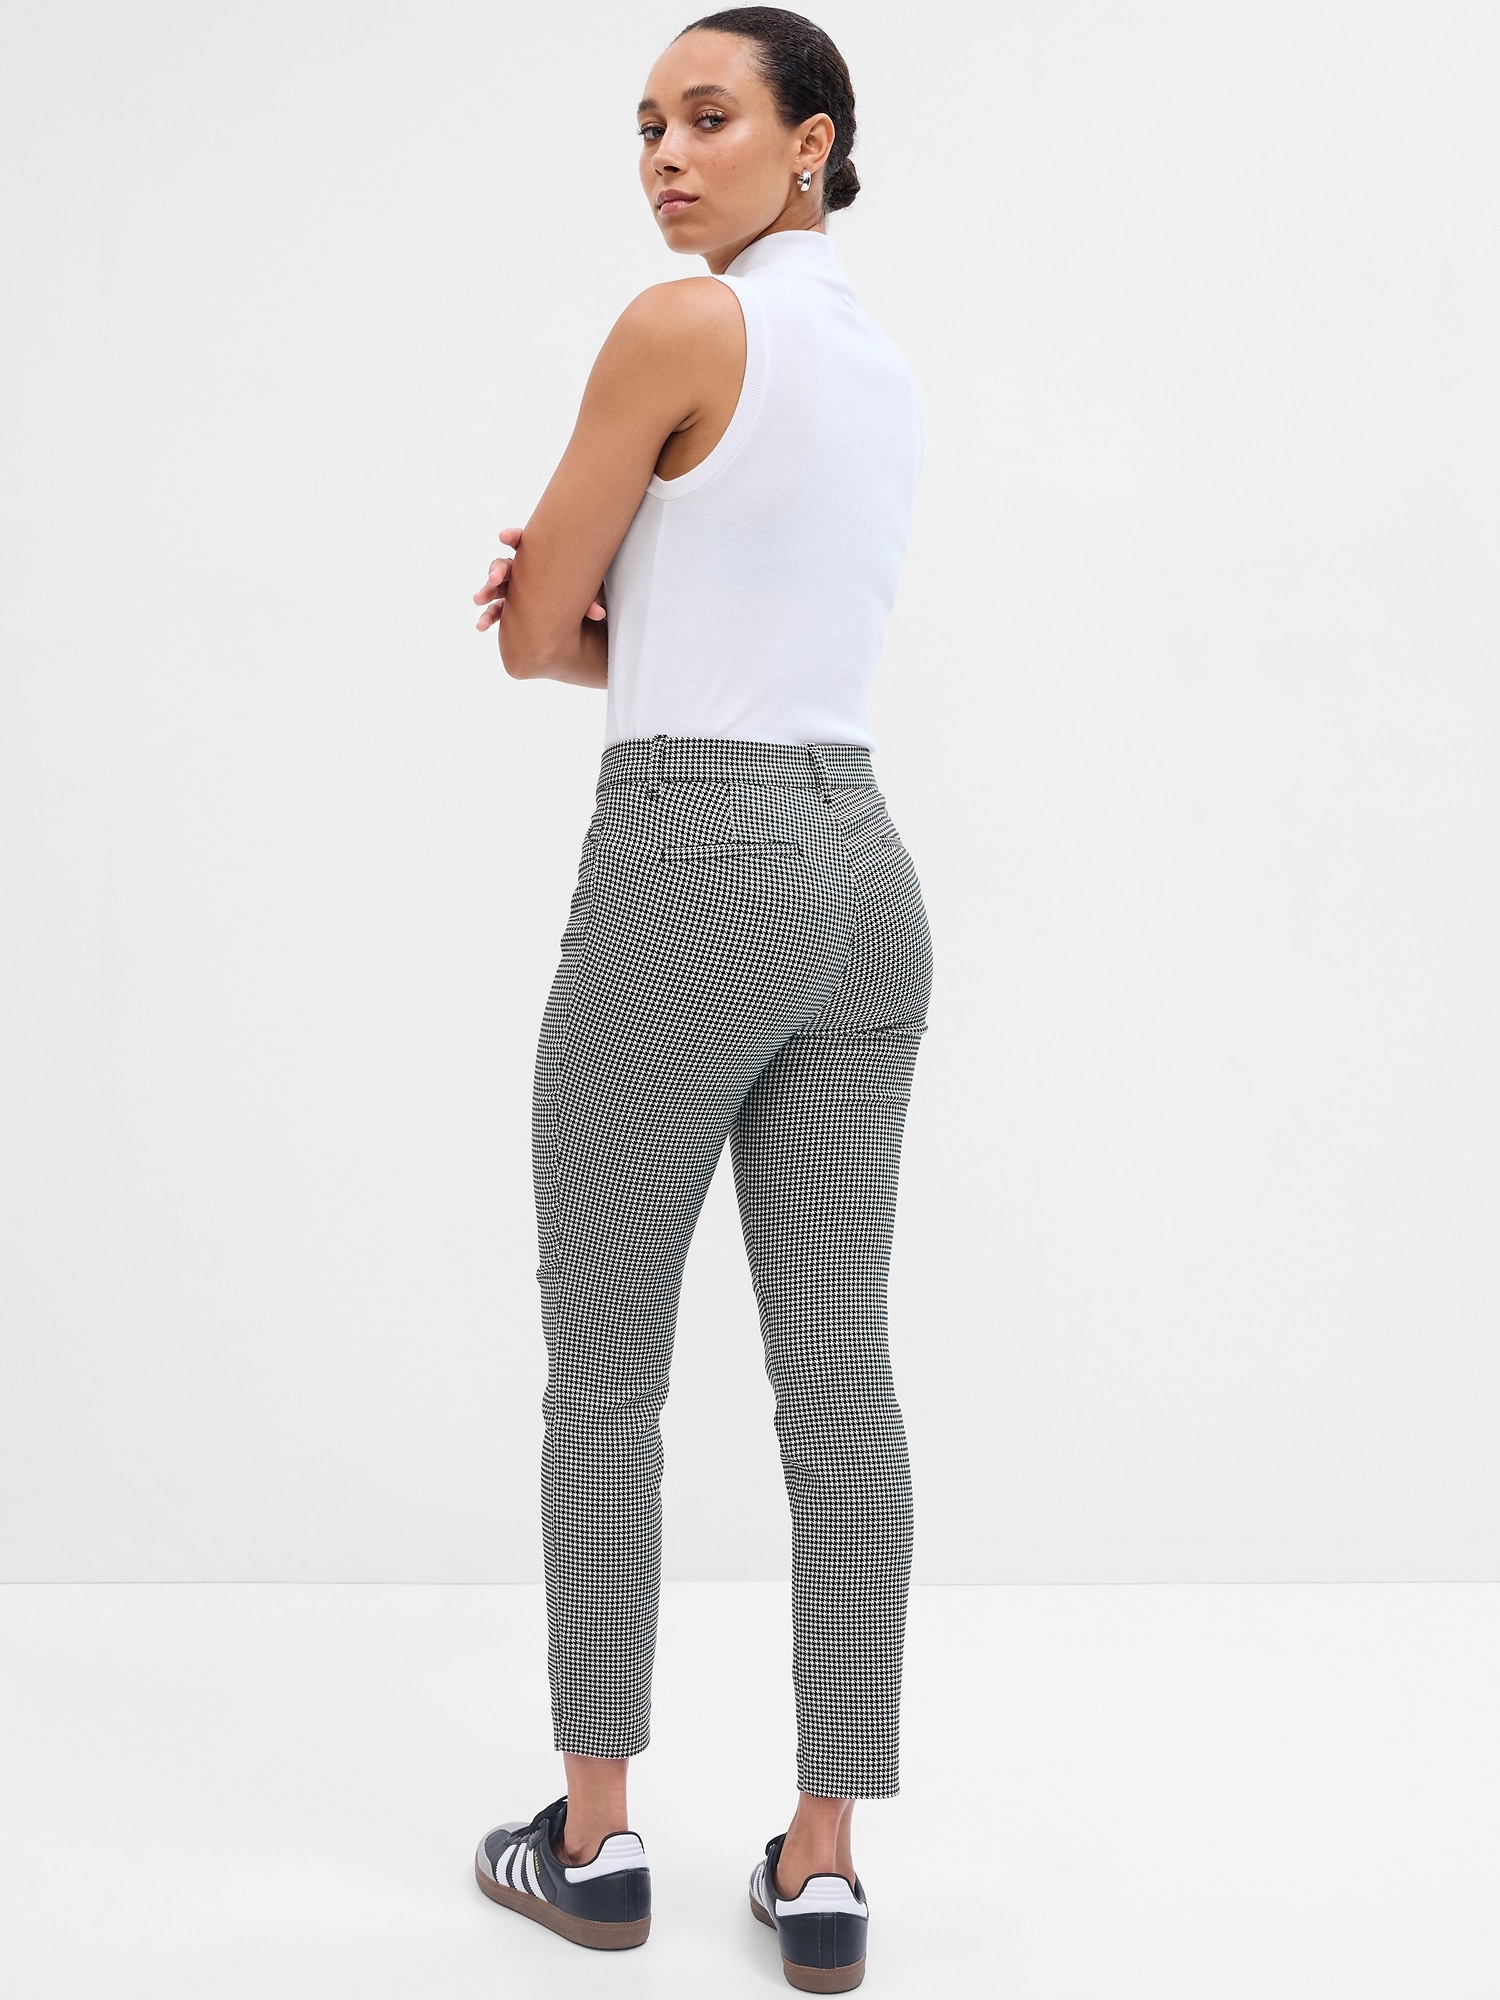 Mid Rise Skinny Ankle Pants in Bi-Stretch with Washwell | Gap Factory